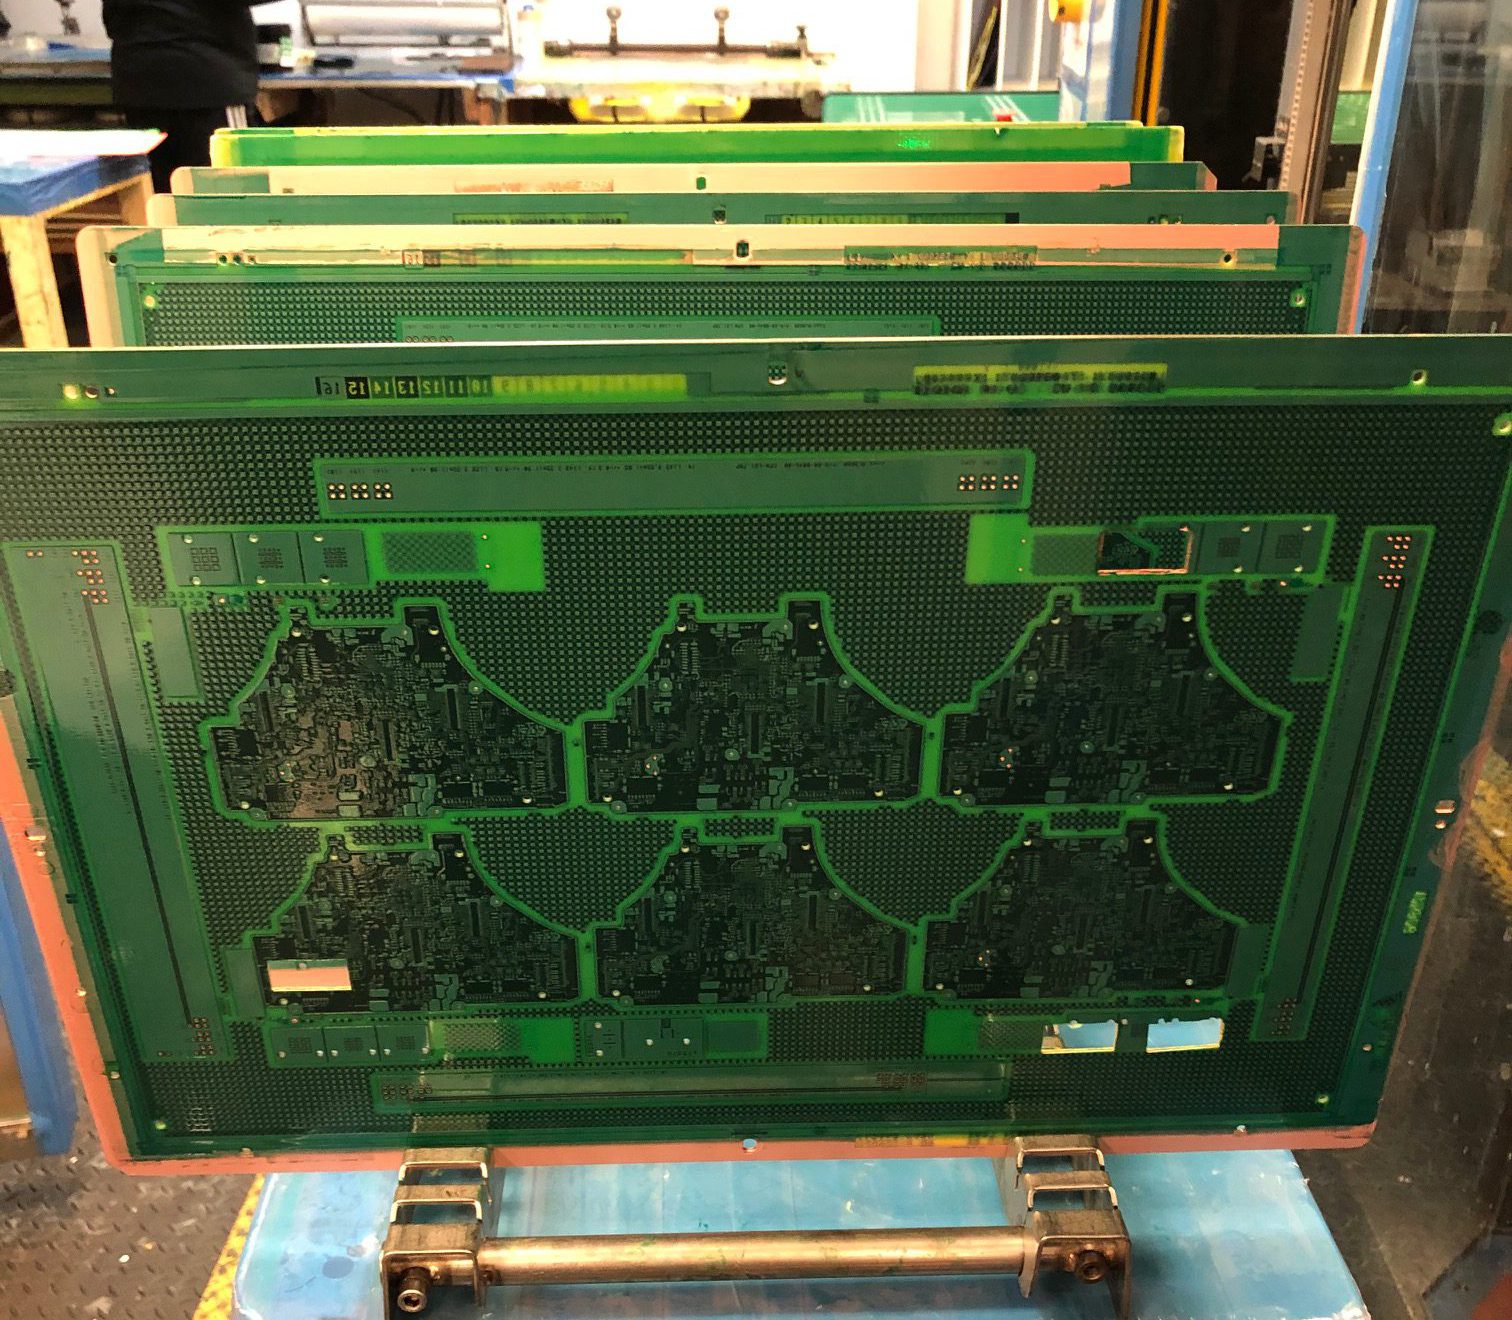 Panels coated with solder mask